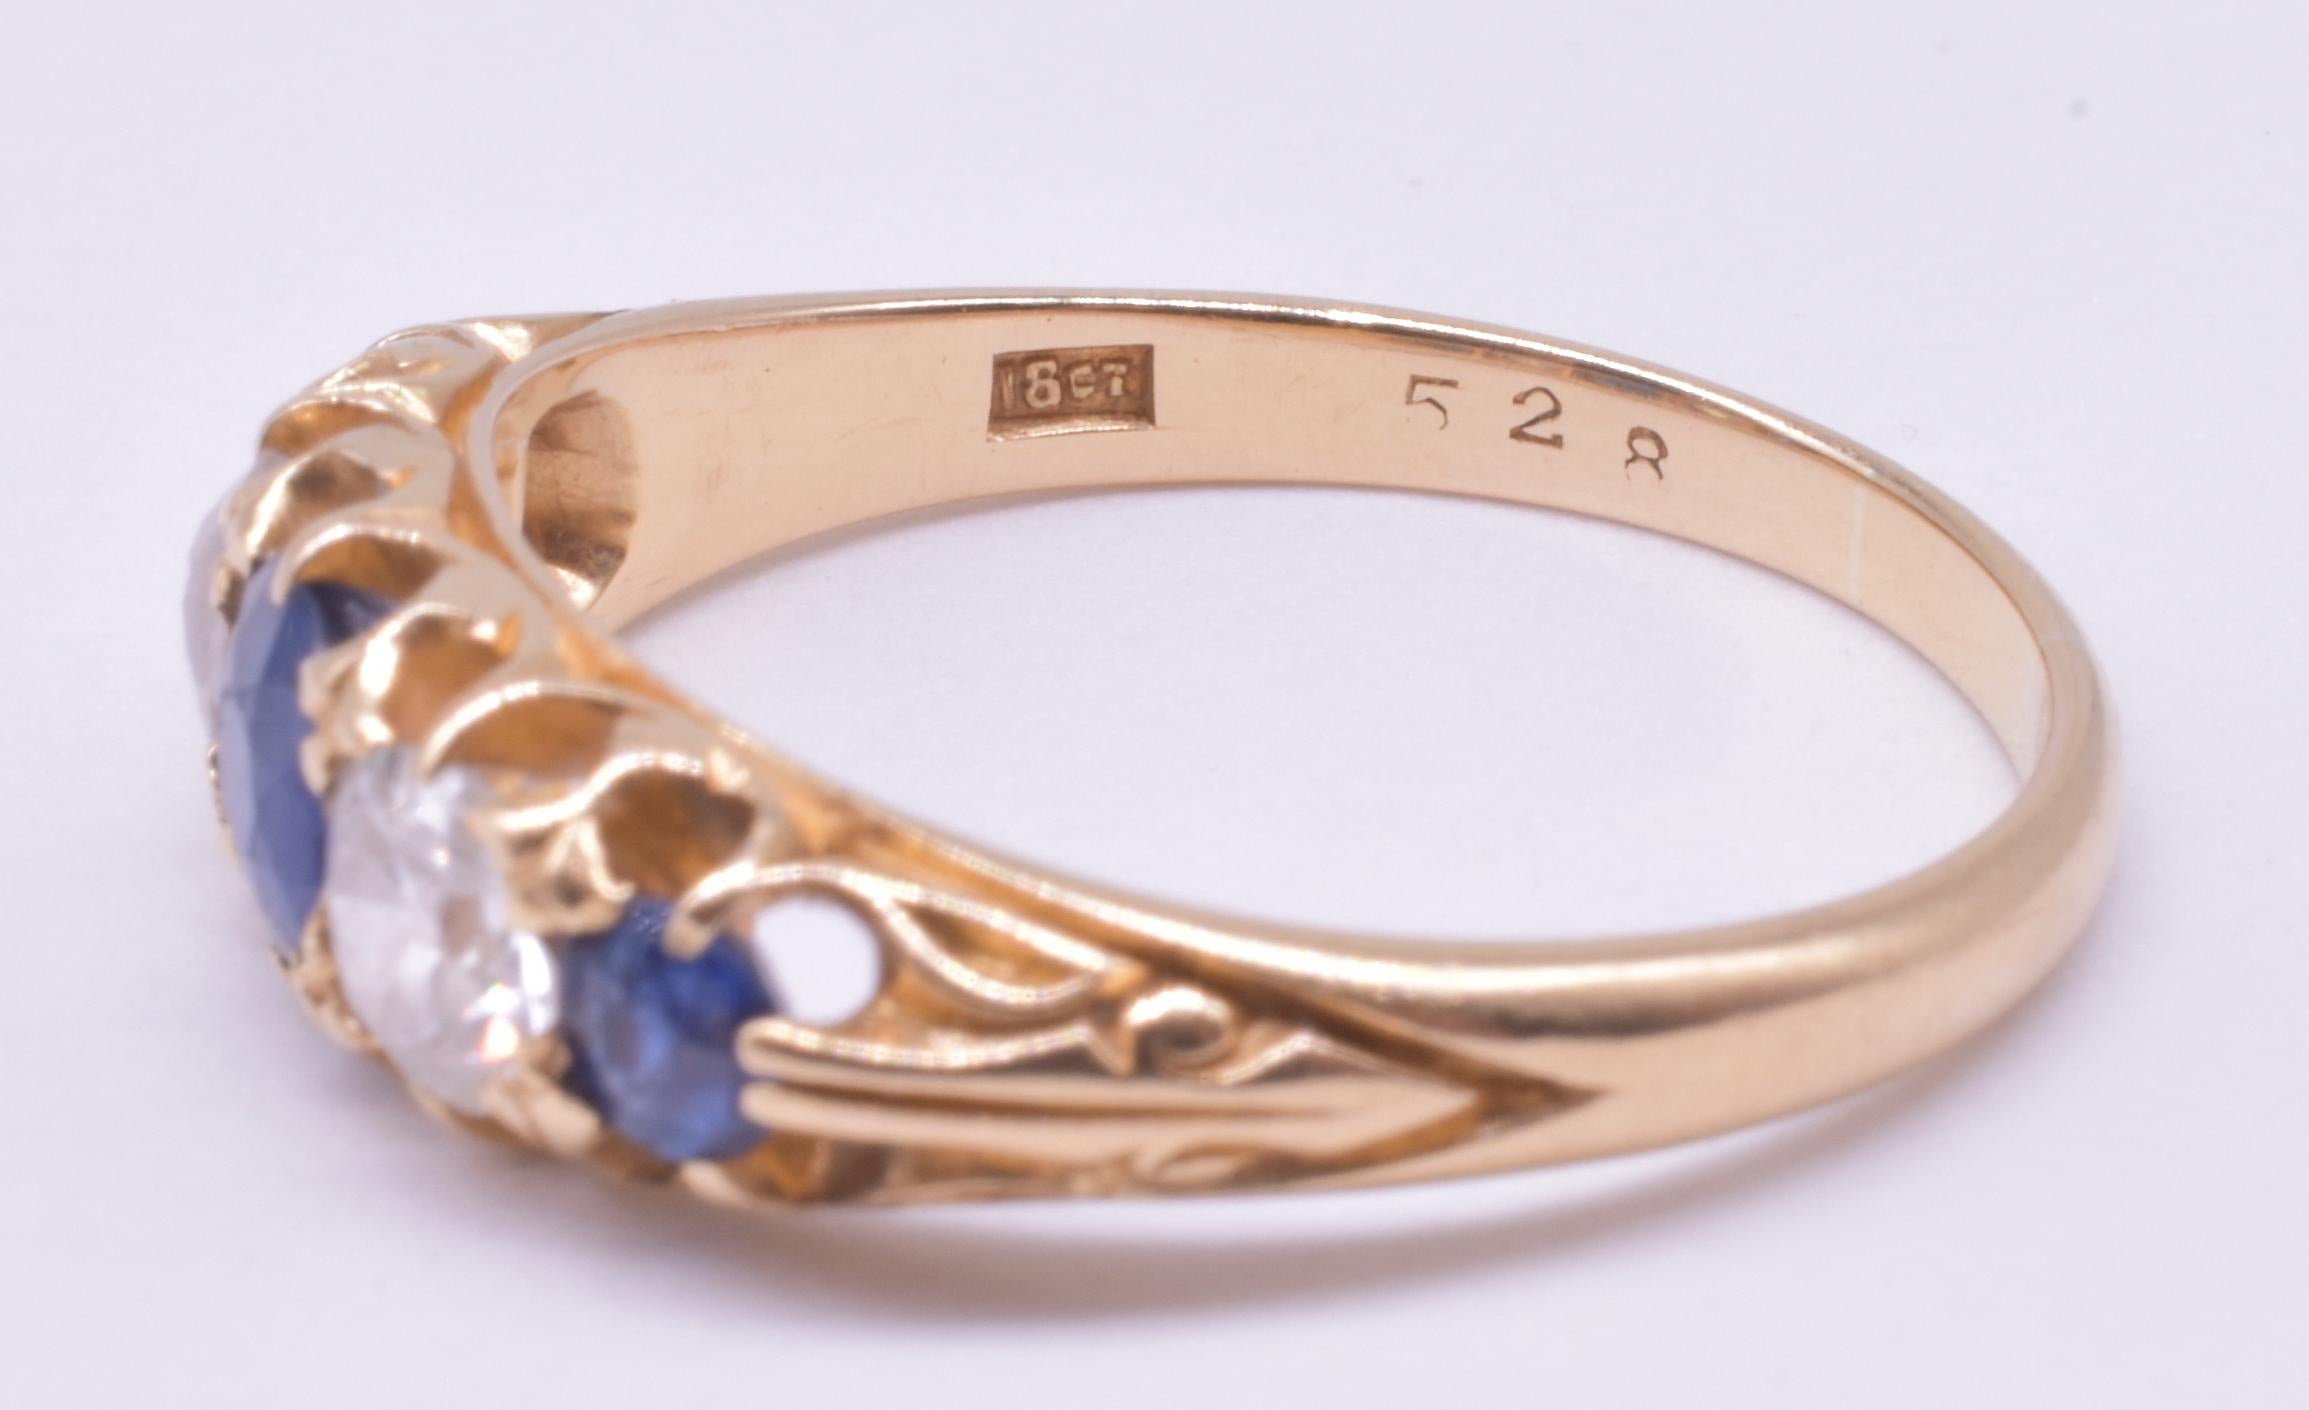 18K yellow gold sapphire ring with three Old Mine cut sapphires and two diamonds, all roughly equal in size, in the form of the half hoop ring, with the emphasis on the gemstones. The ring is set 